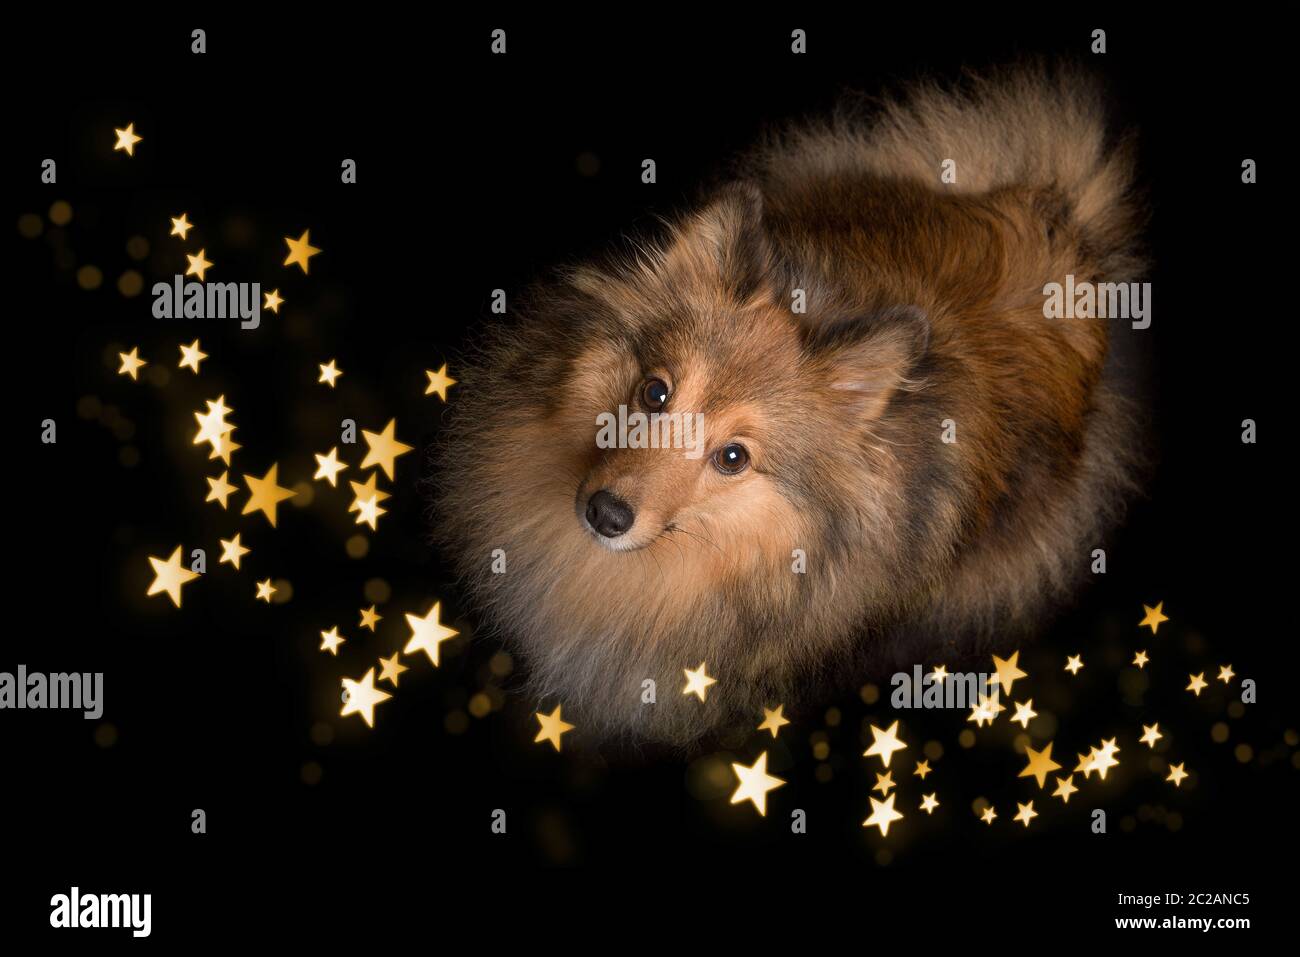 Shetland sheepdog looking up on a black background with star shaped lights Stock Photo